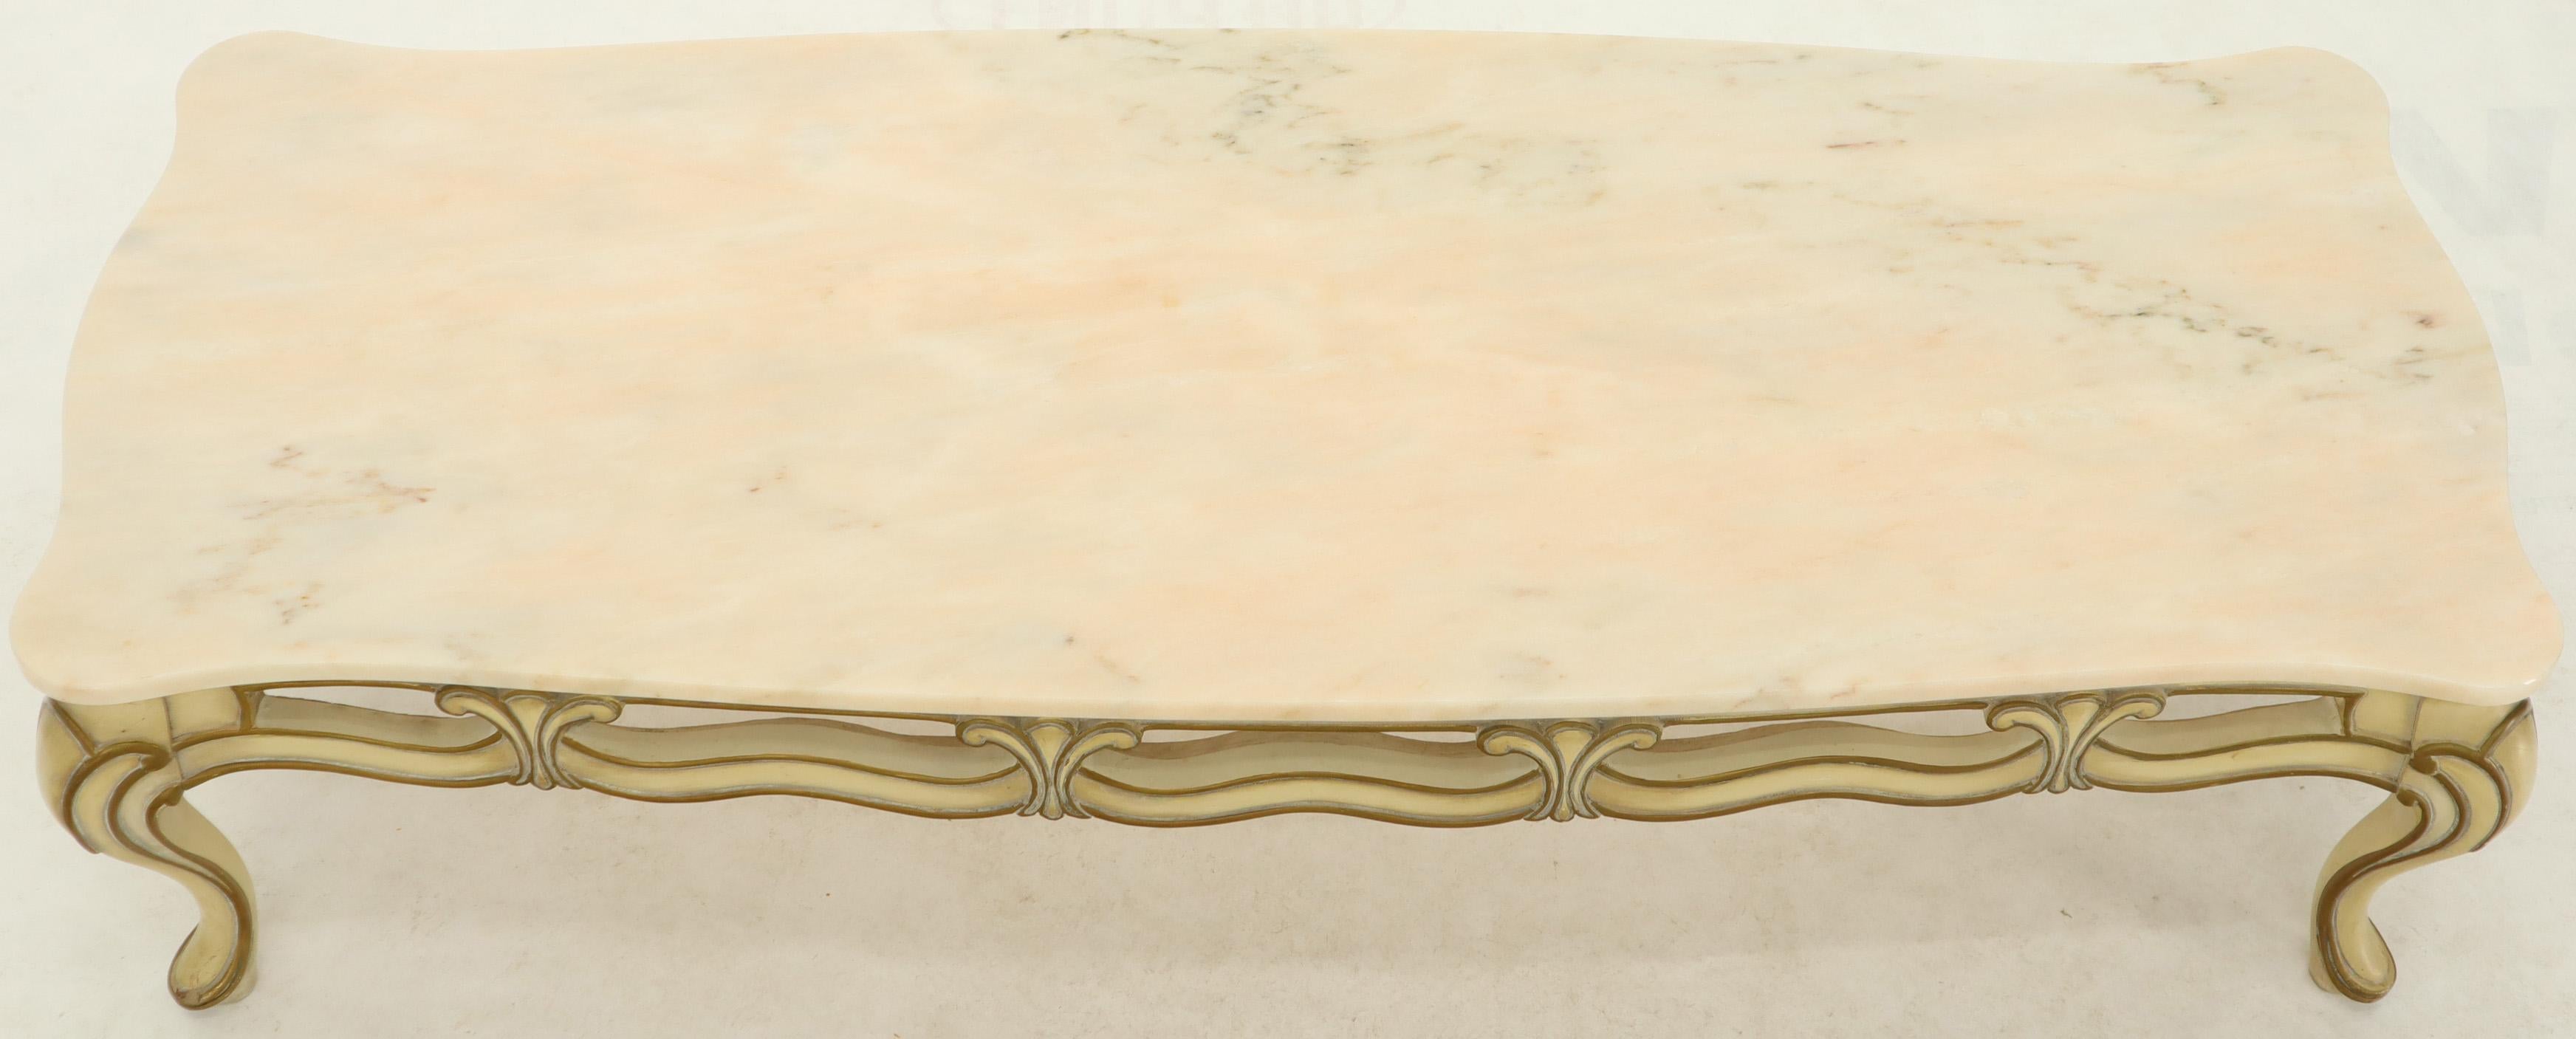 American Marble to Pierced Carving Country French Provincial Coffee Table Cabriole Legs